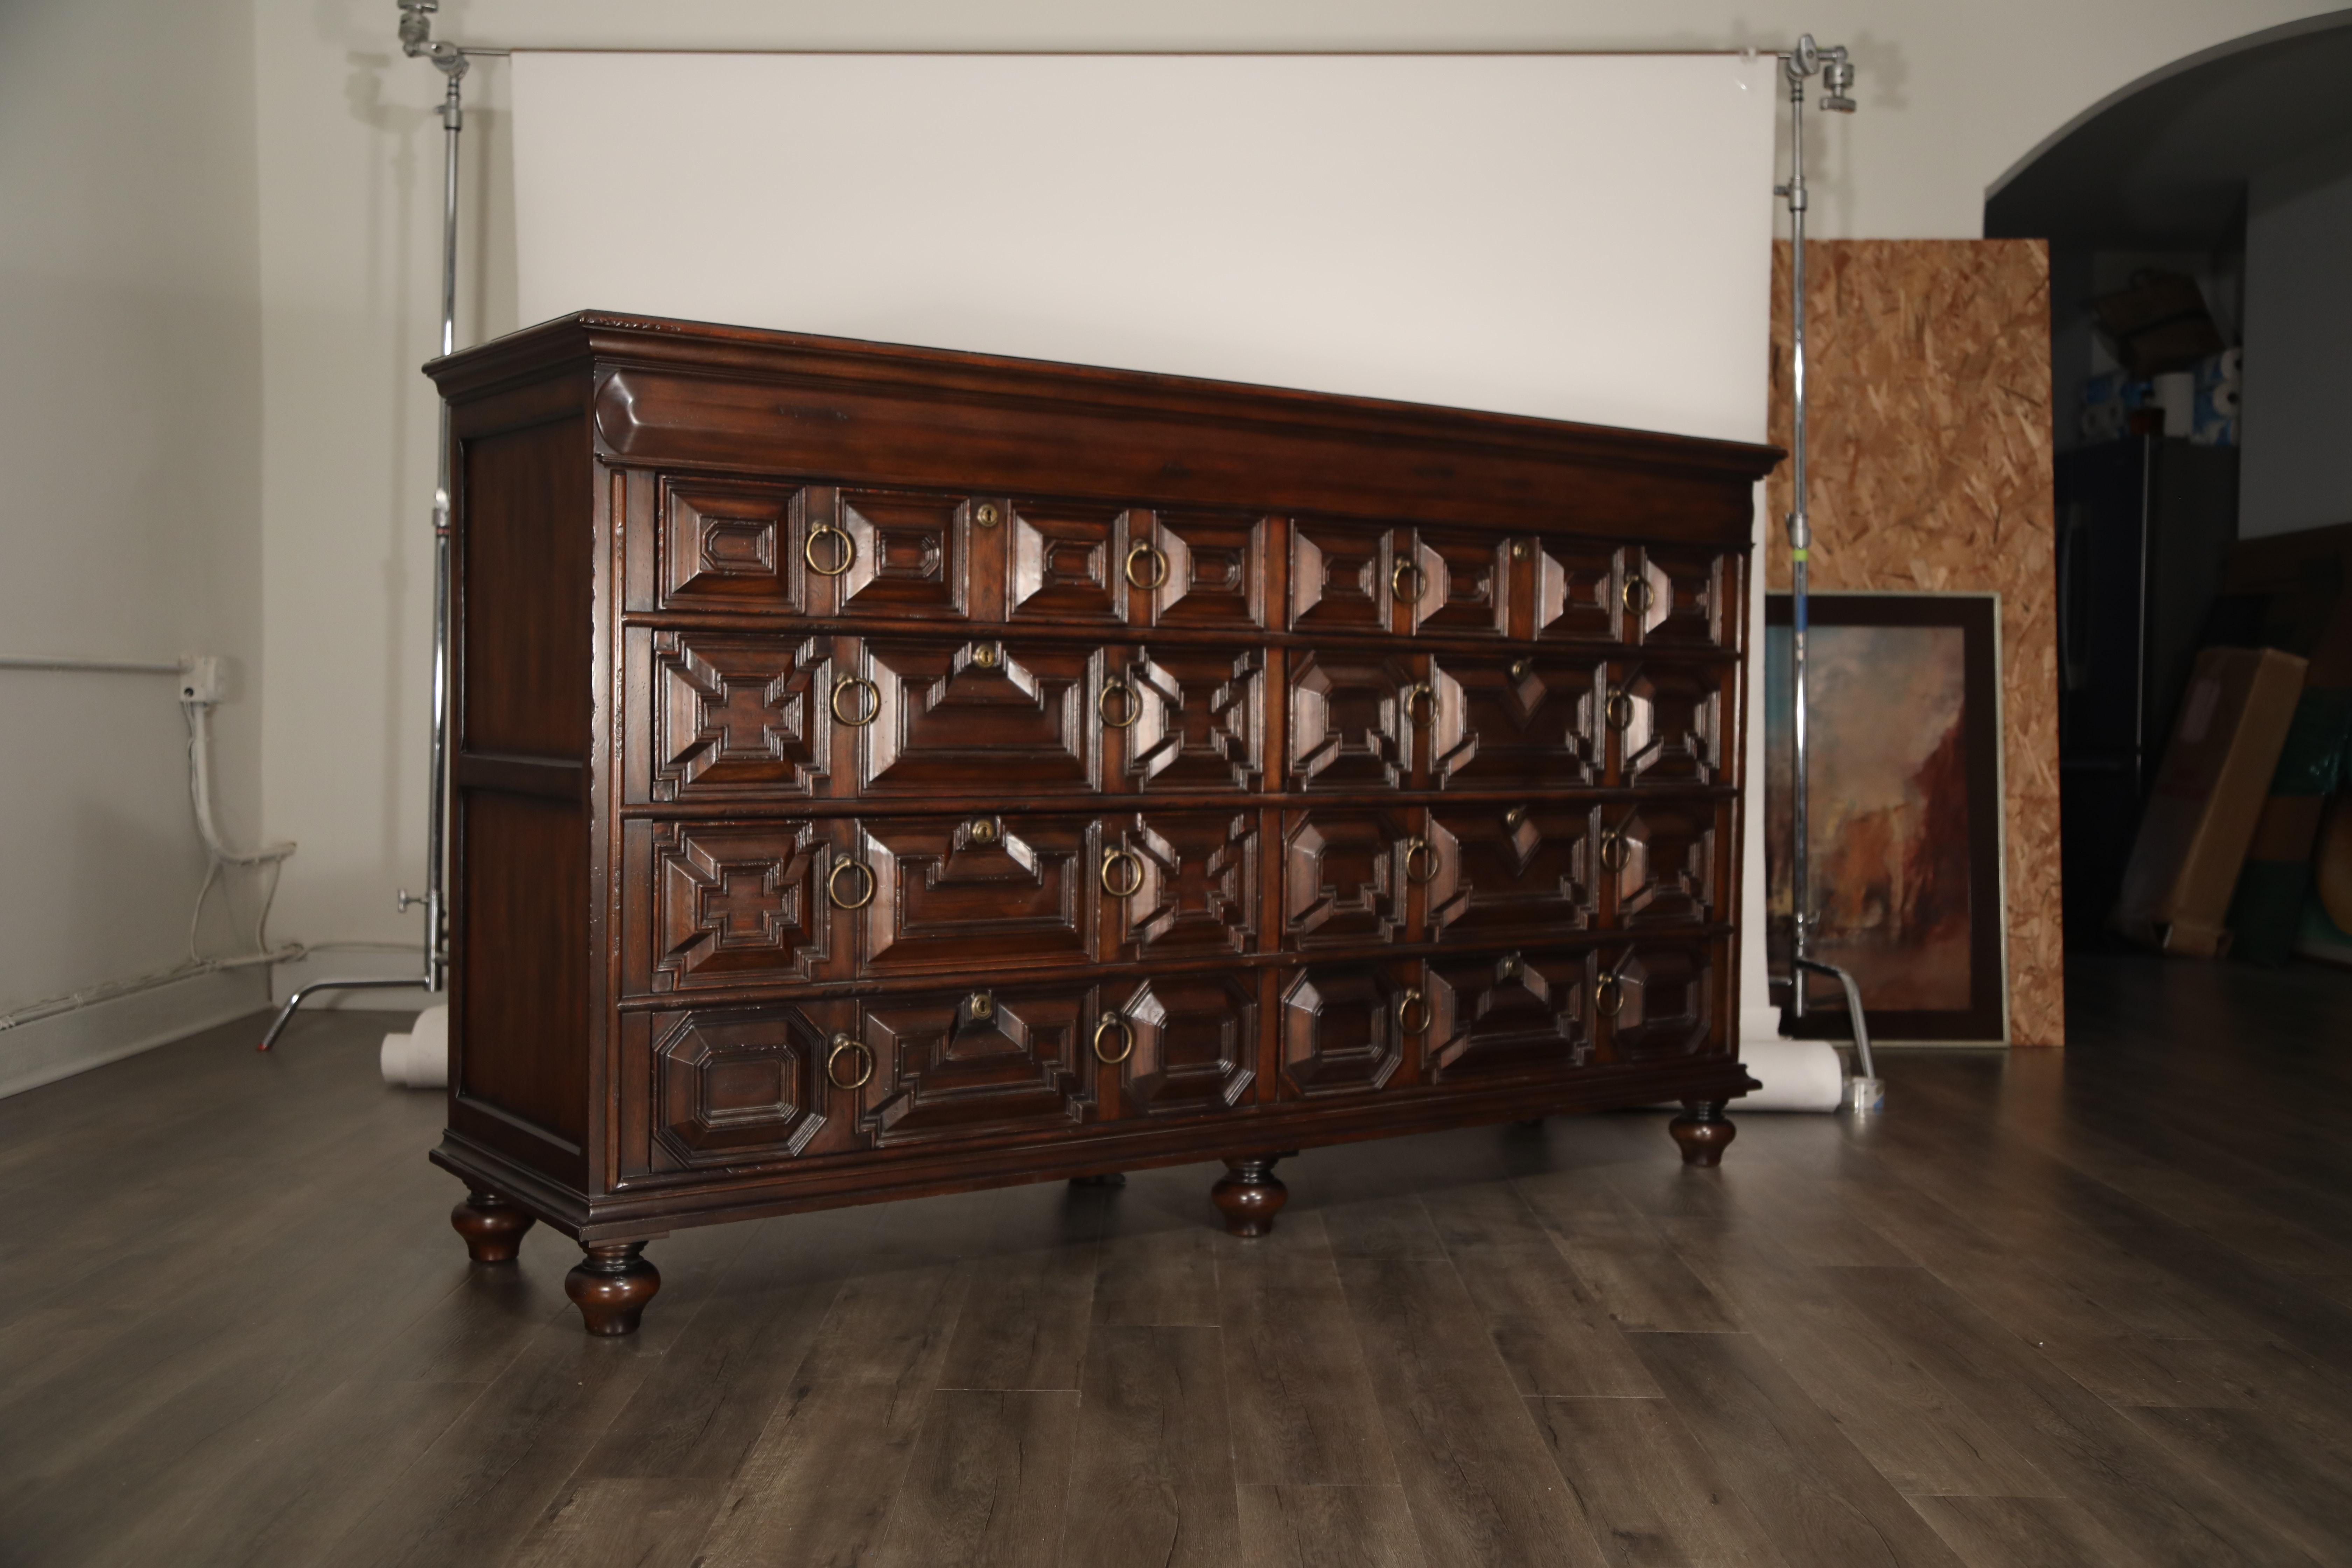 British Colonial Monumental Sized 'Brittany' Chest of Drawers by Polo, Signed